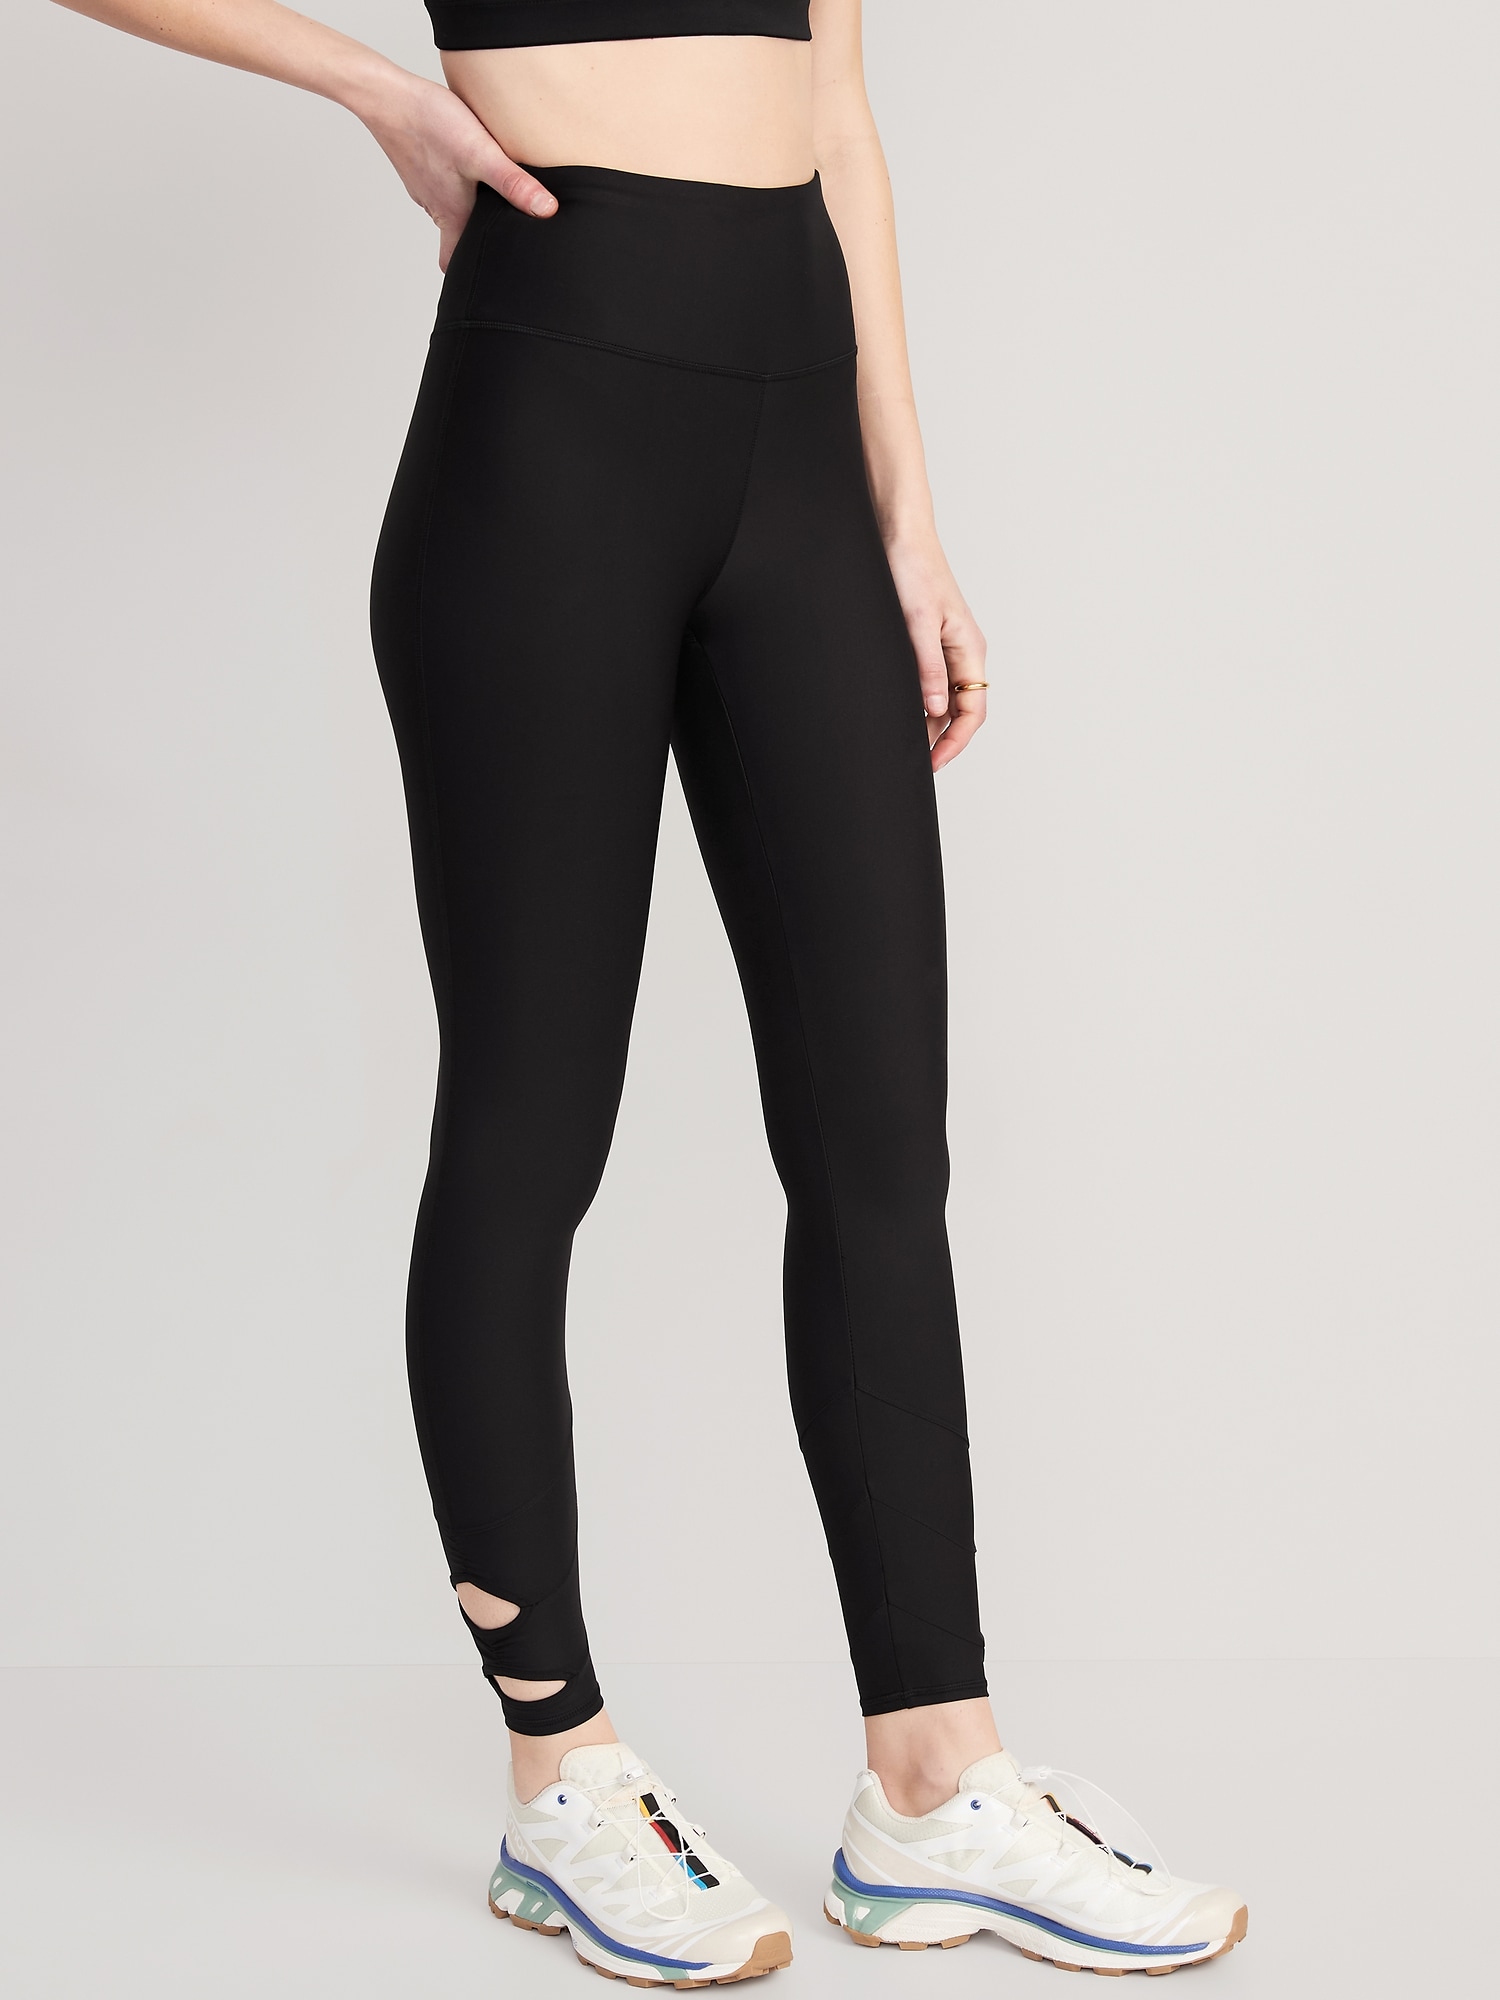 High-Waisted PowerSoft 7/8 Cutout Leggings for Women | Old Navy